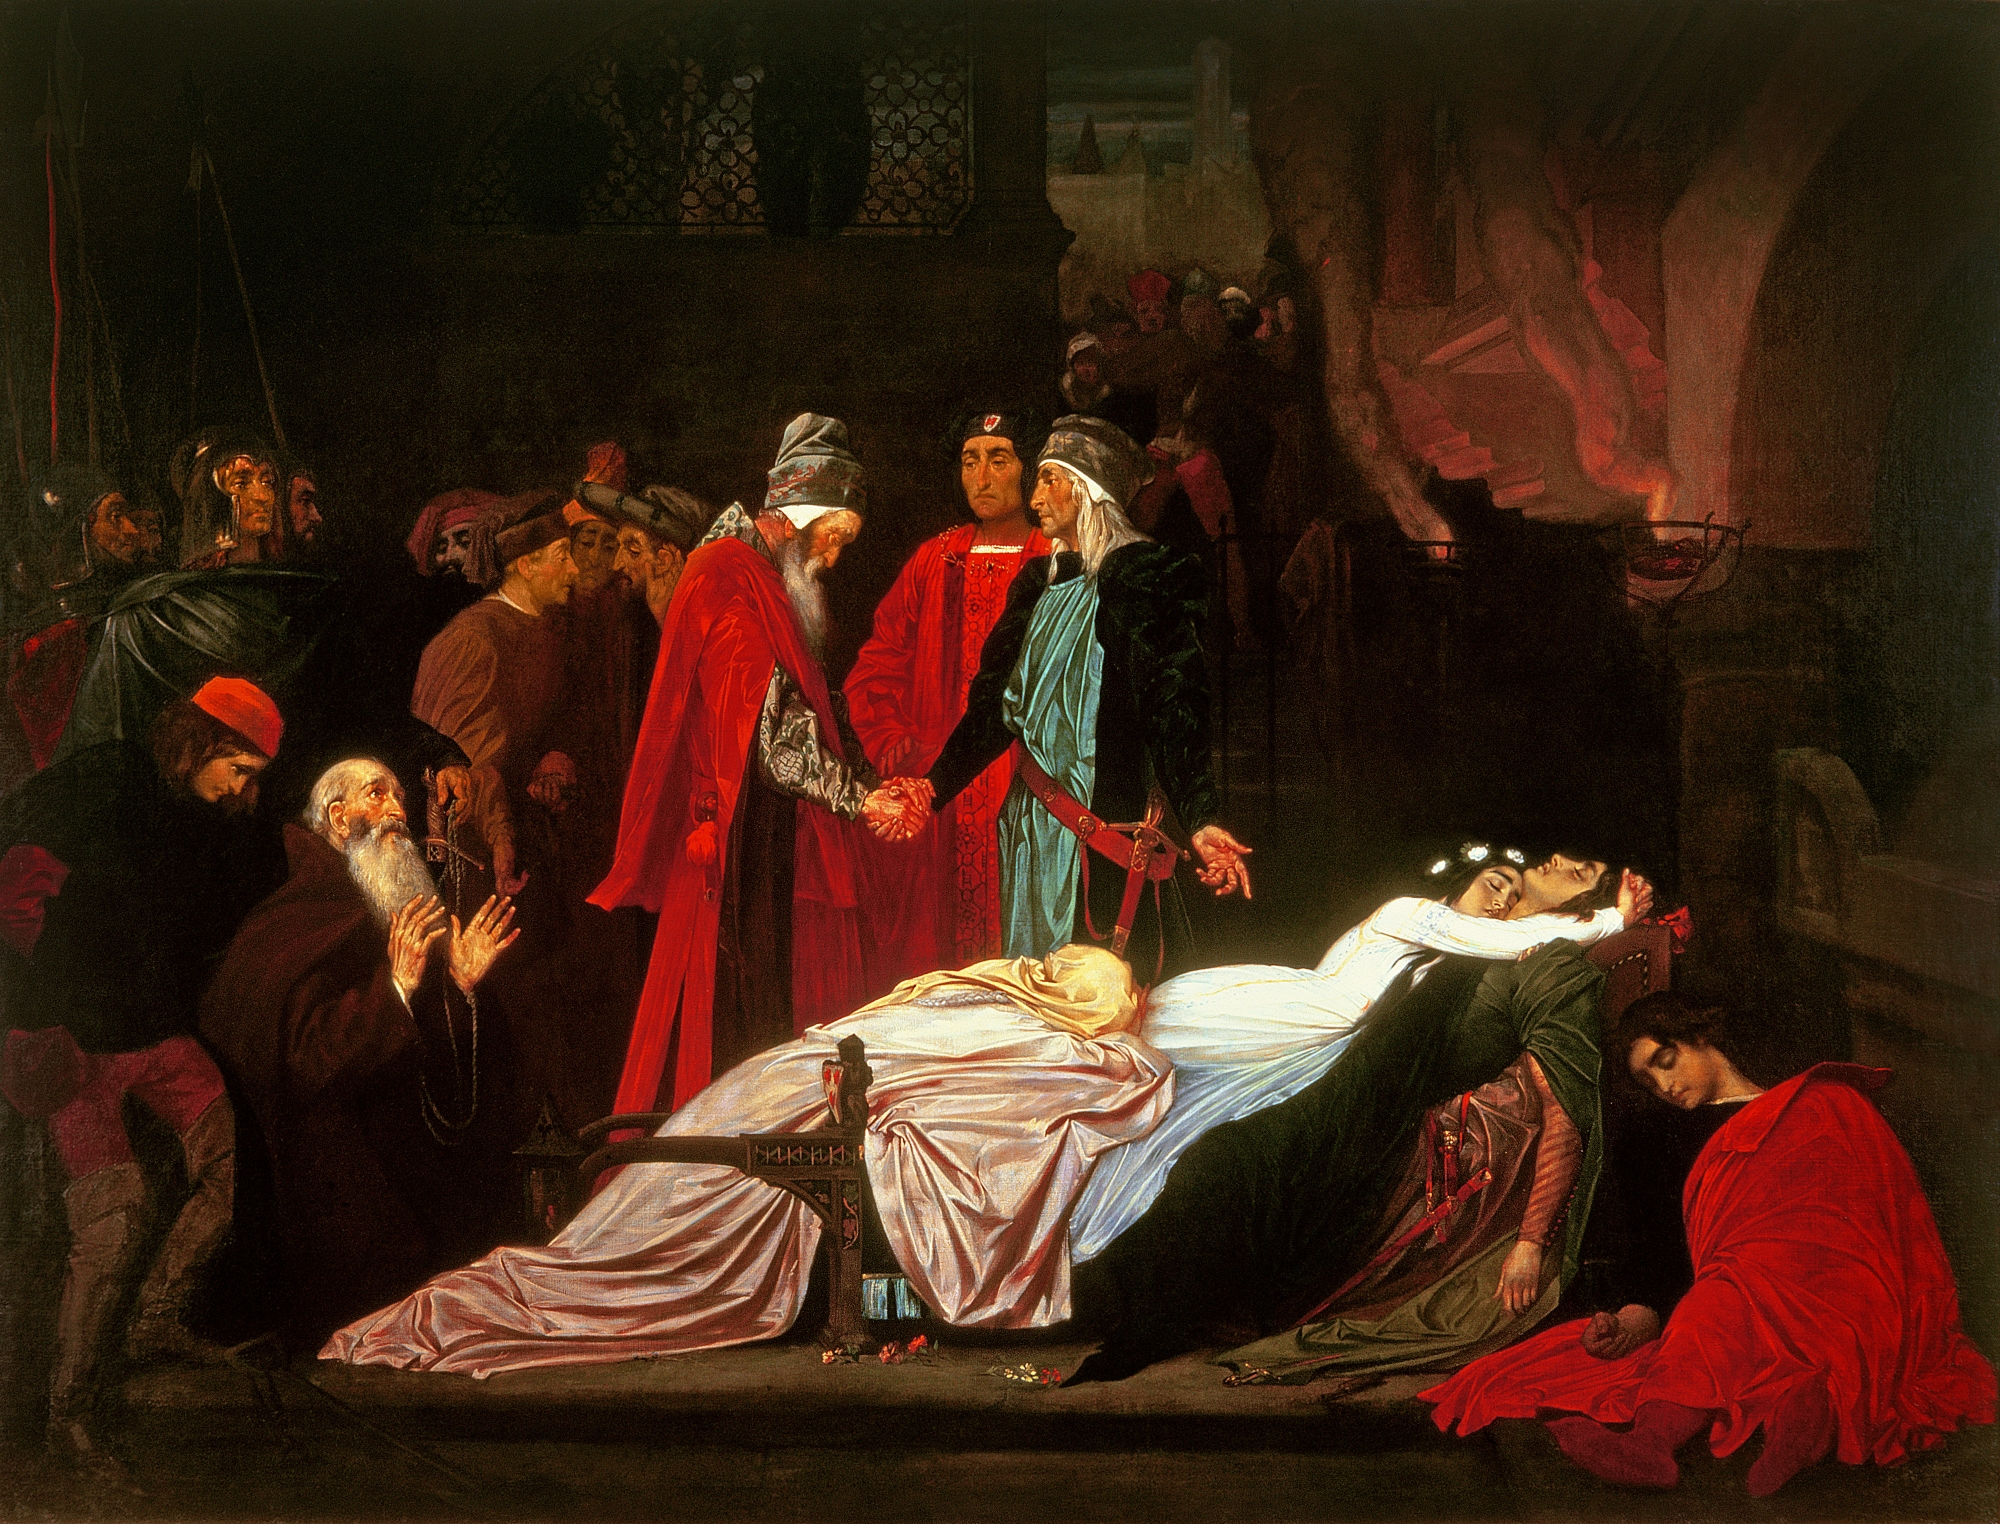  Leighton, Frederic (1830-96). "The Reconciliation of the Montagues and the Capulets over the Dead Bodies of Romeo and Juliet (oil on canvas)." Christie's Images. 2021.